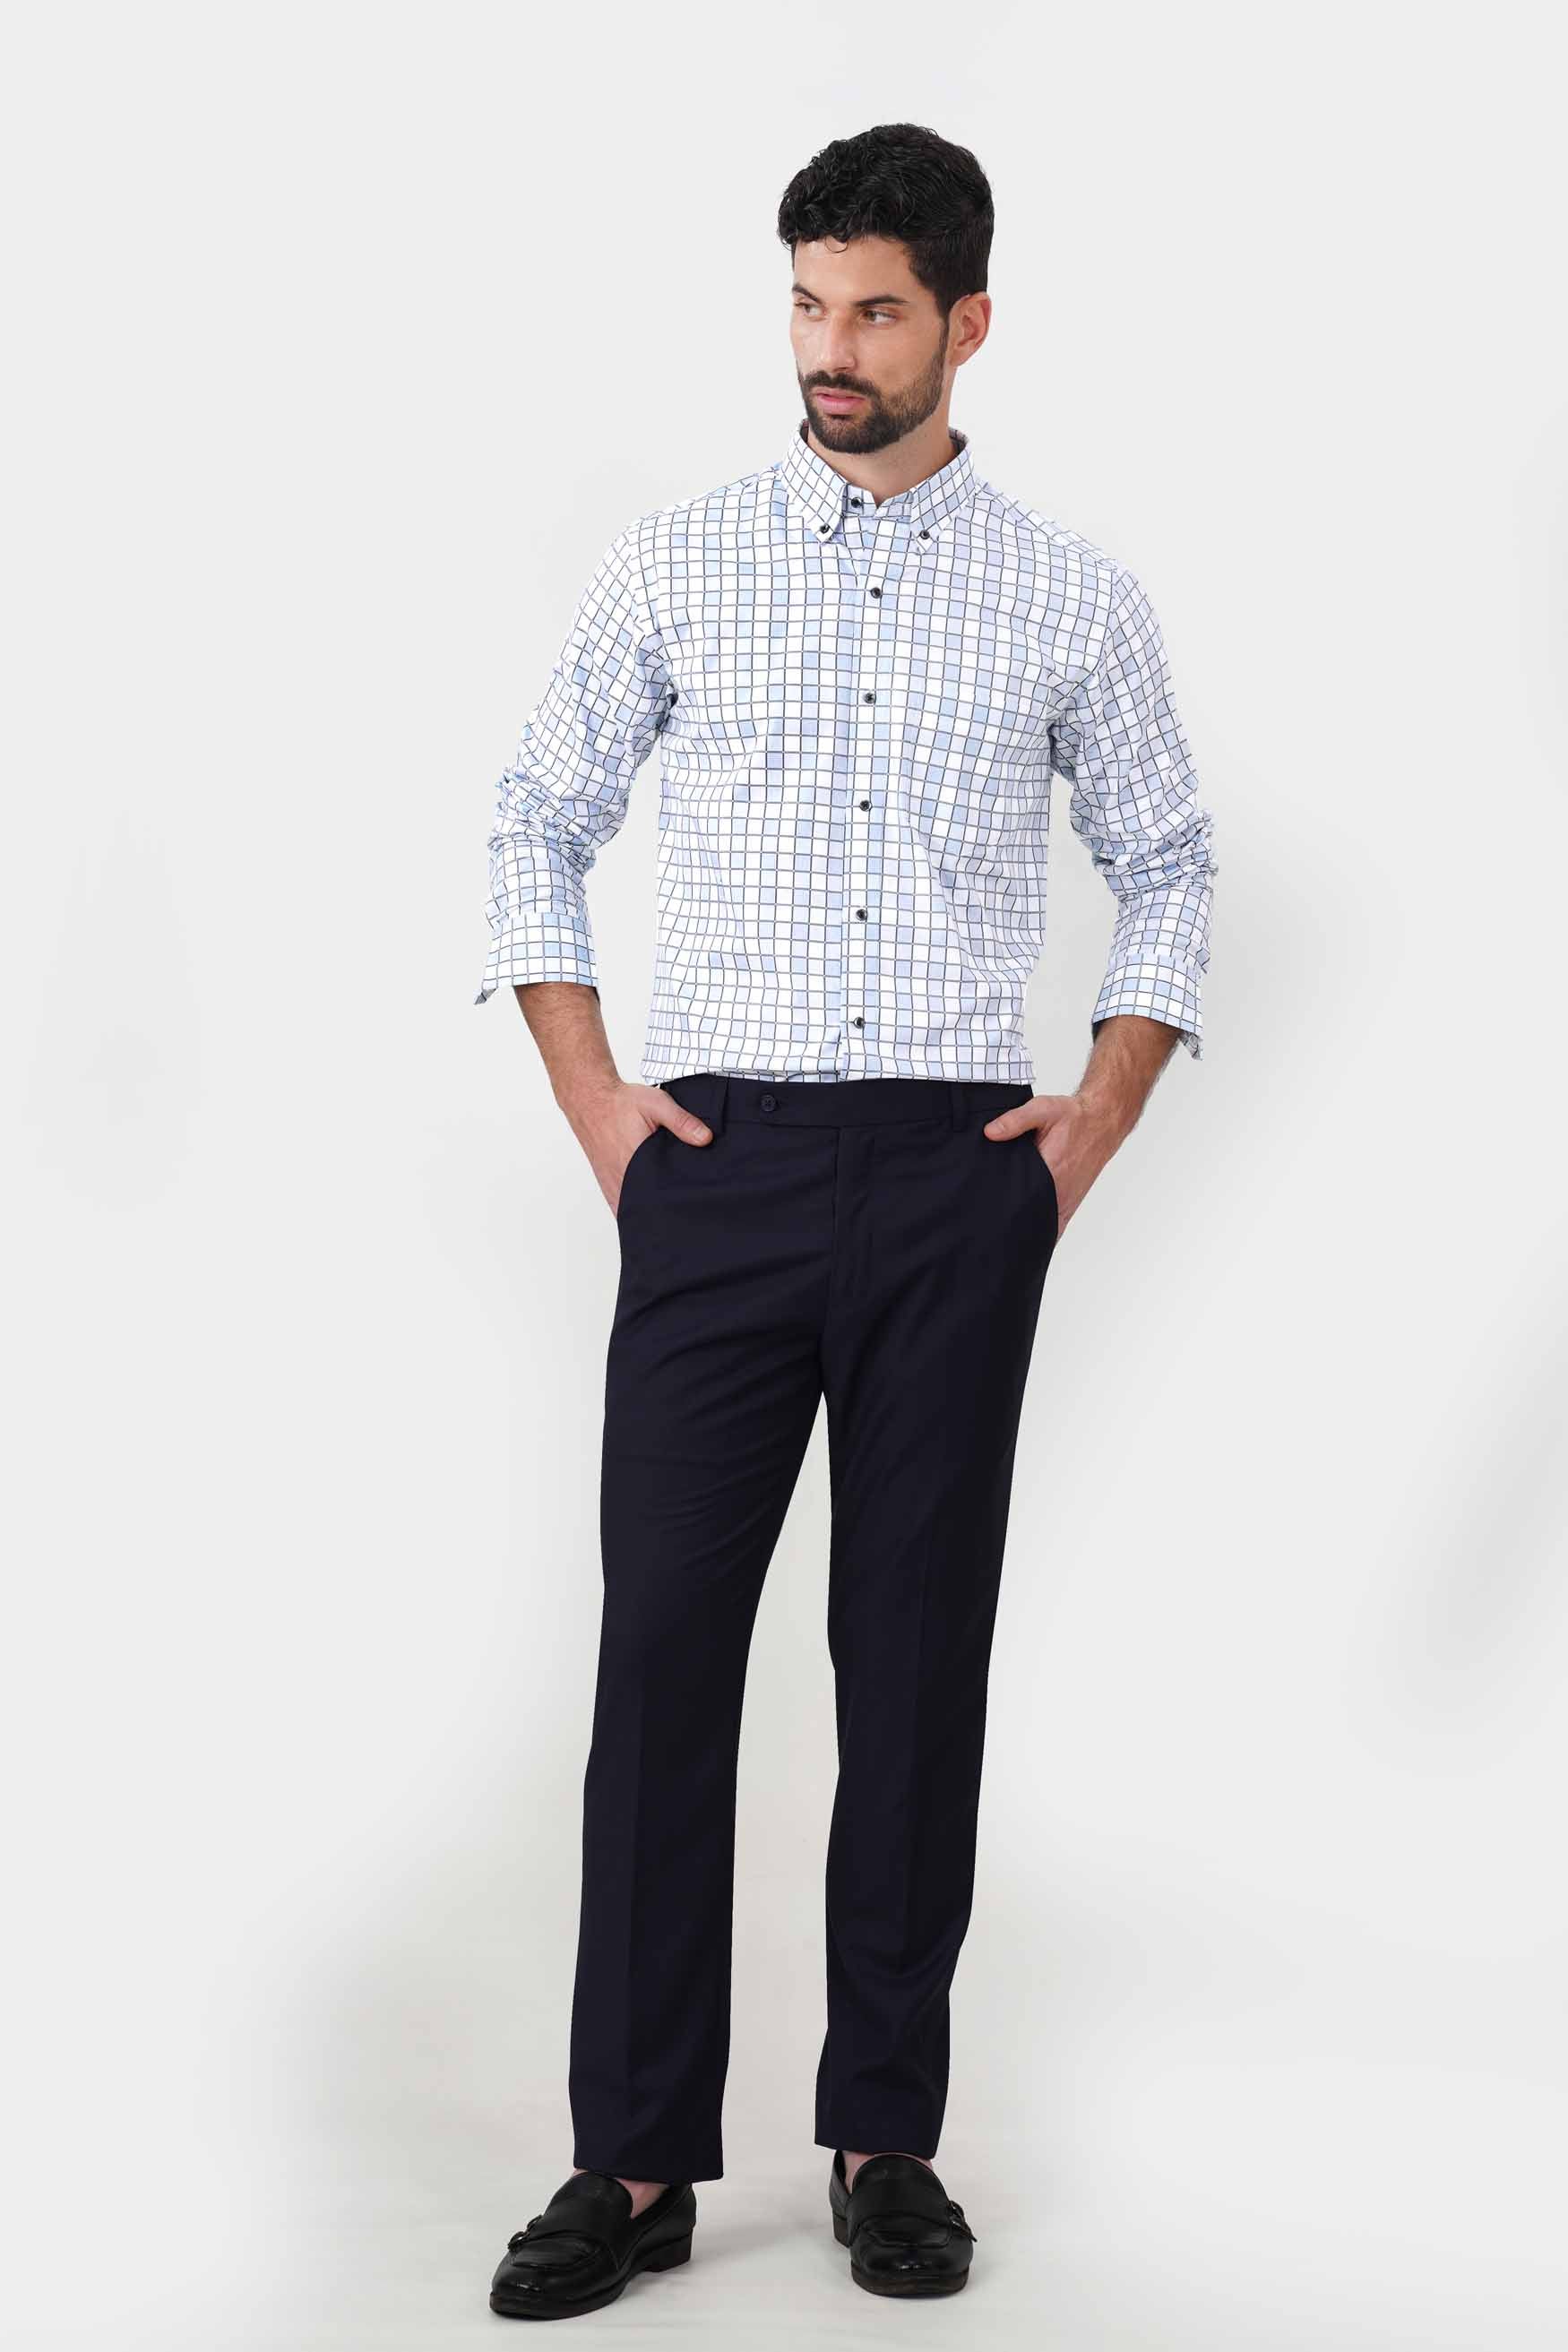 Bright White with Carolina Blue and Mobster Gray Checkered Dobby Premium Giza Cotton Shirt